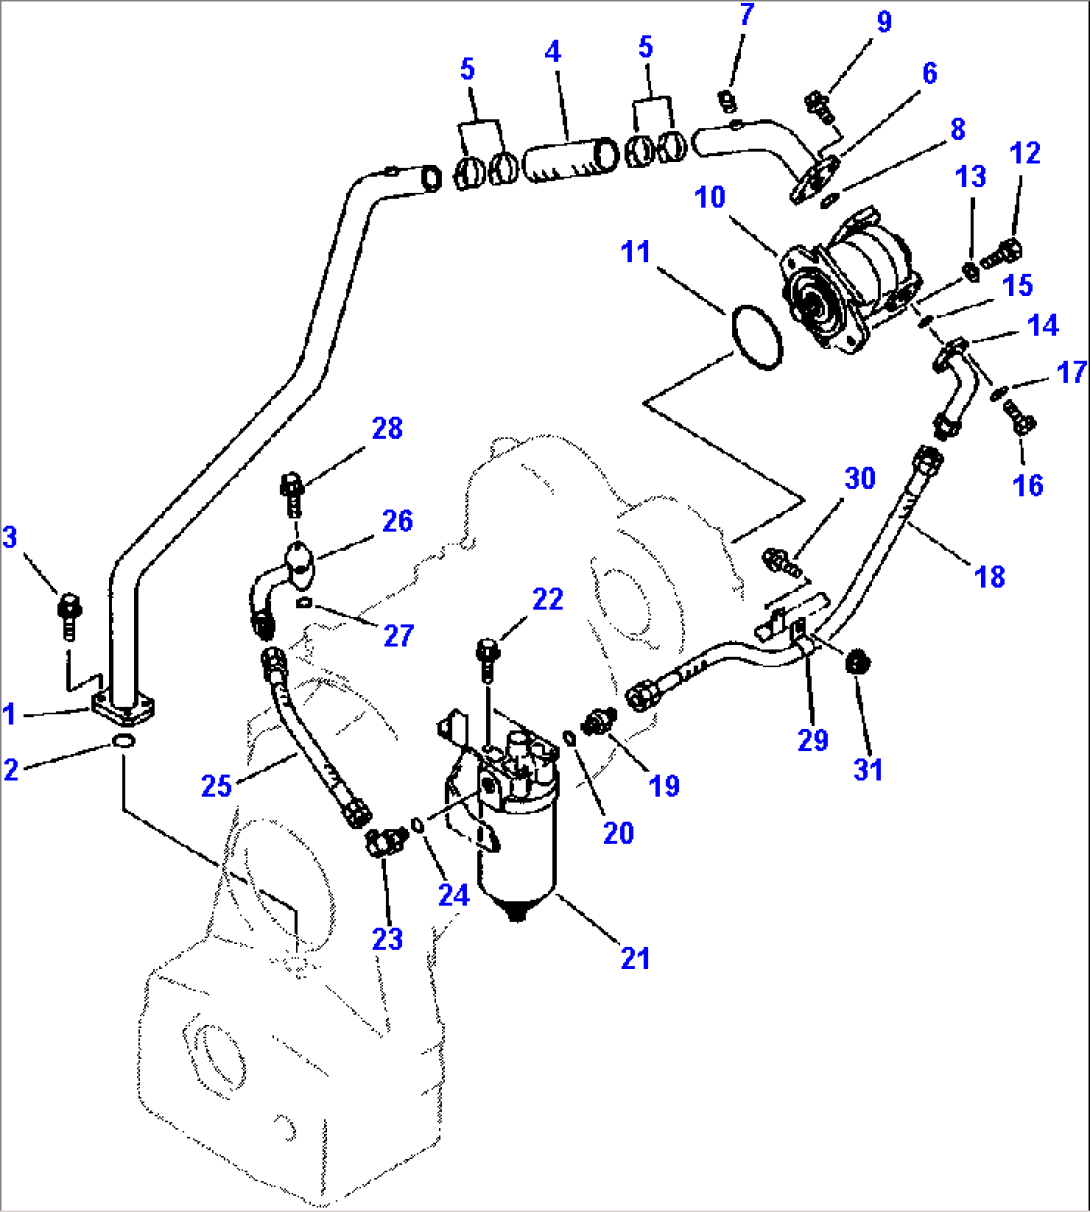 FIG NO. 2711 TRANSMISSION AND TORQUE CONVERTER PIPING